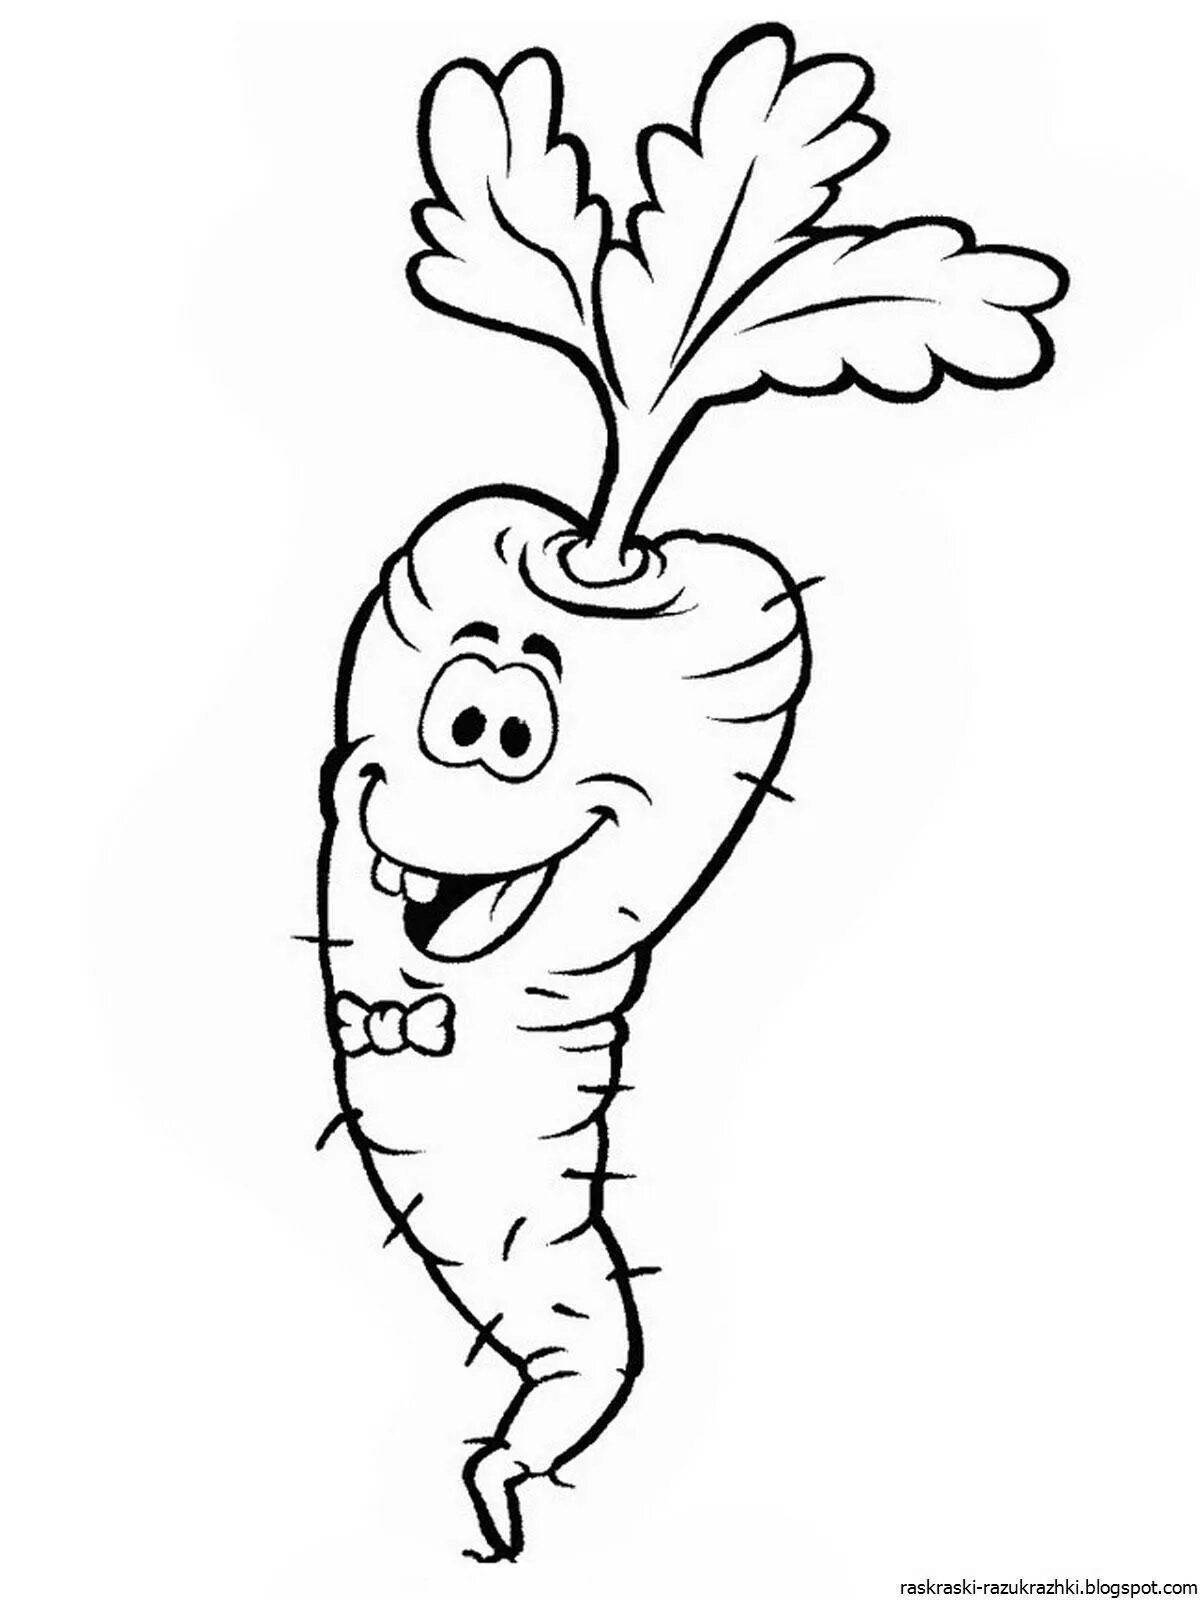 Carrot drawing for kids #2